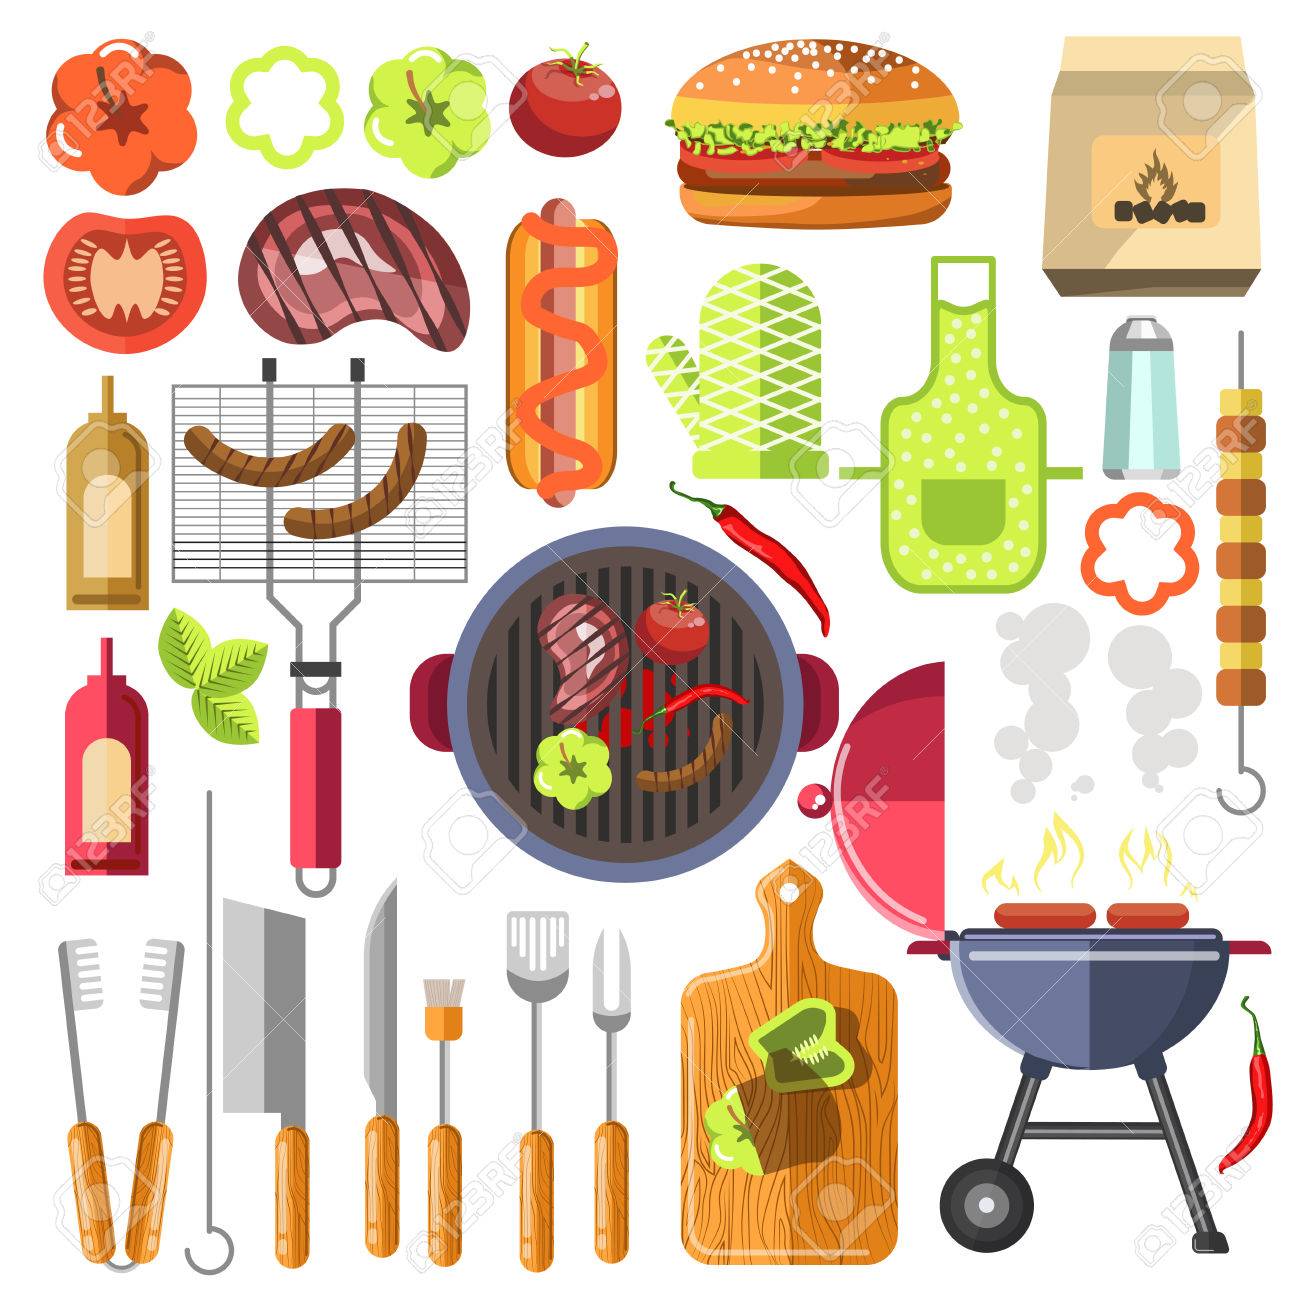 cookout clipart stock photo